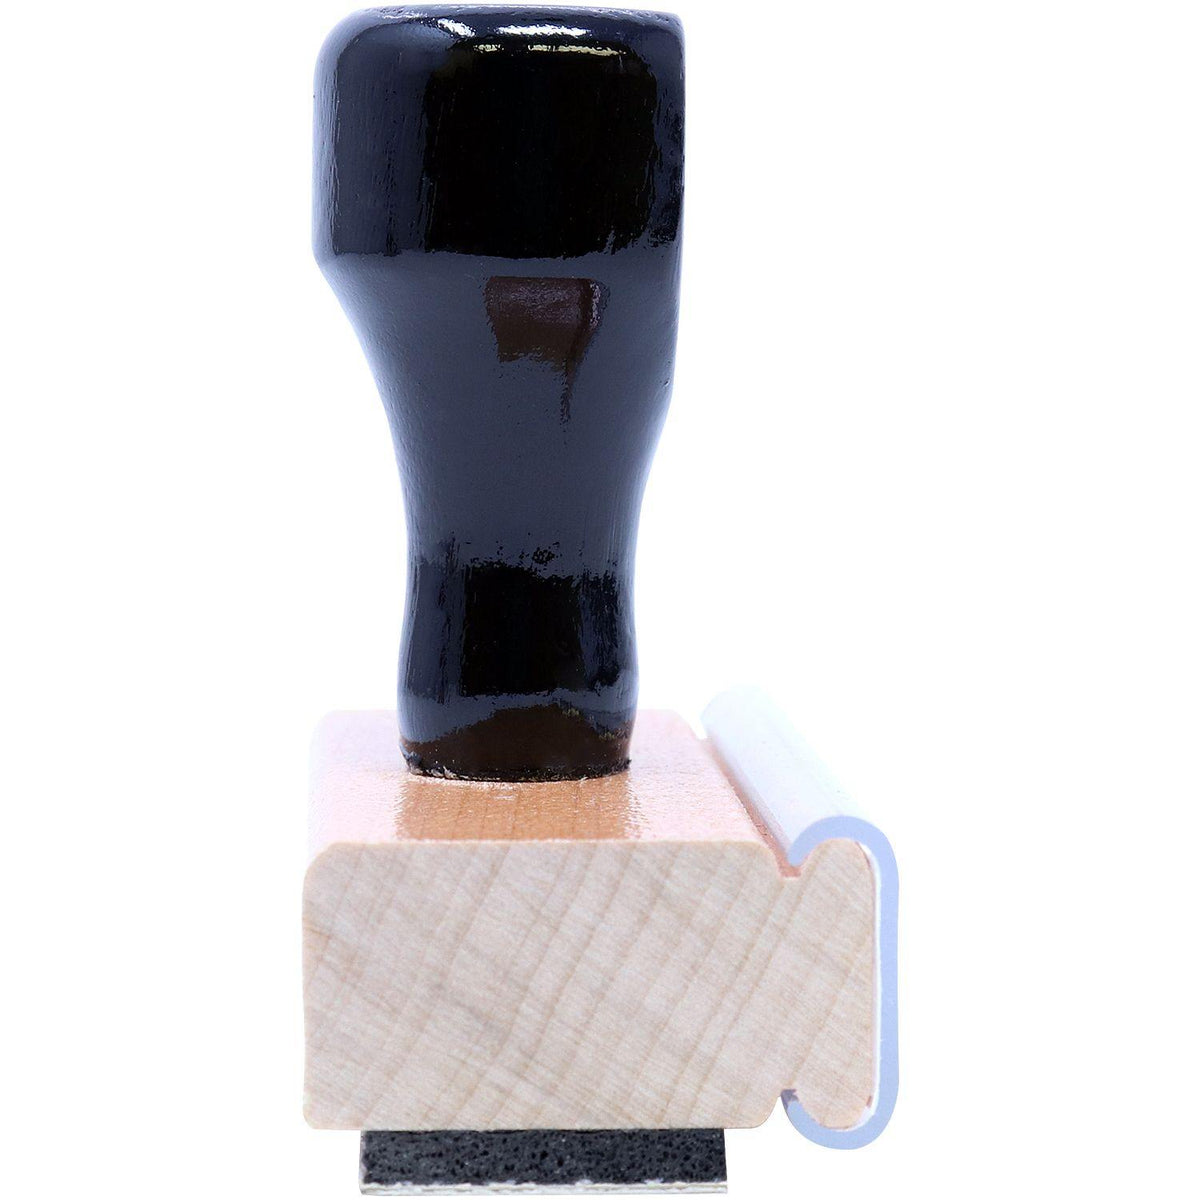 Side View of Large Late Rubber Stamp